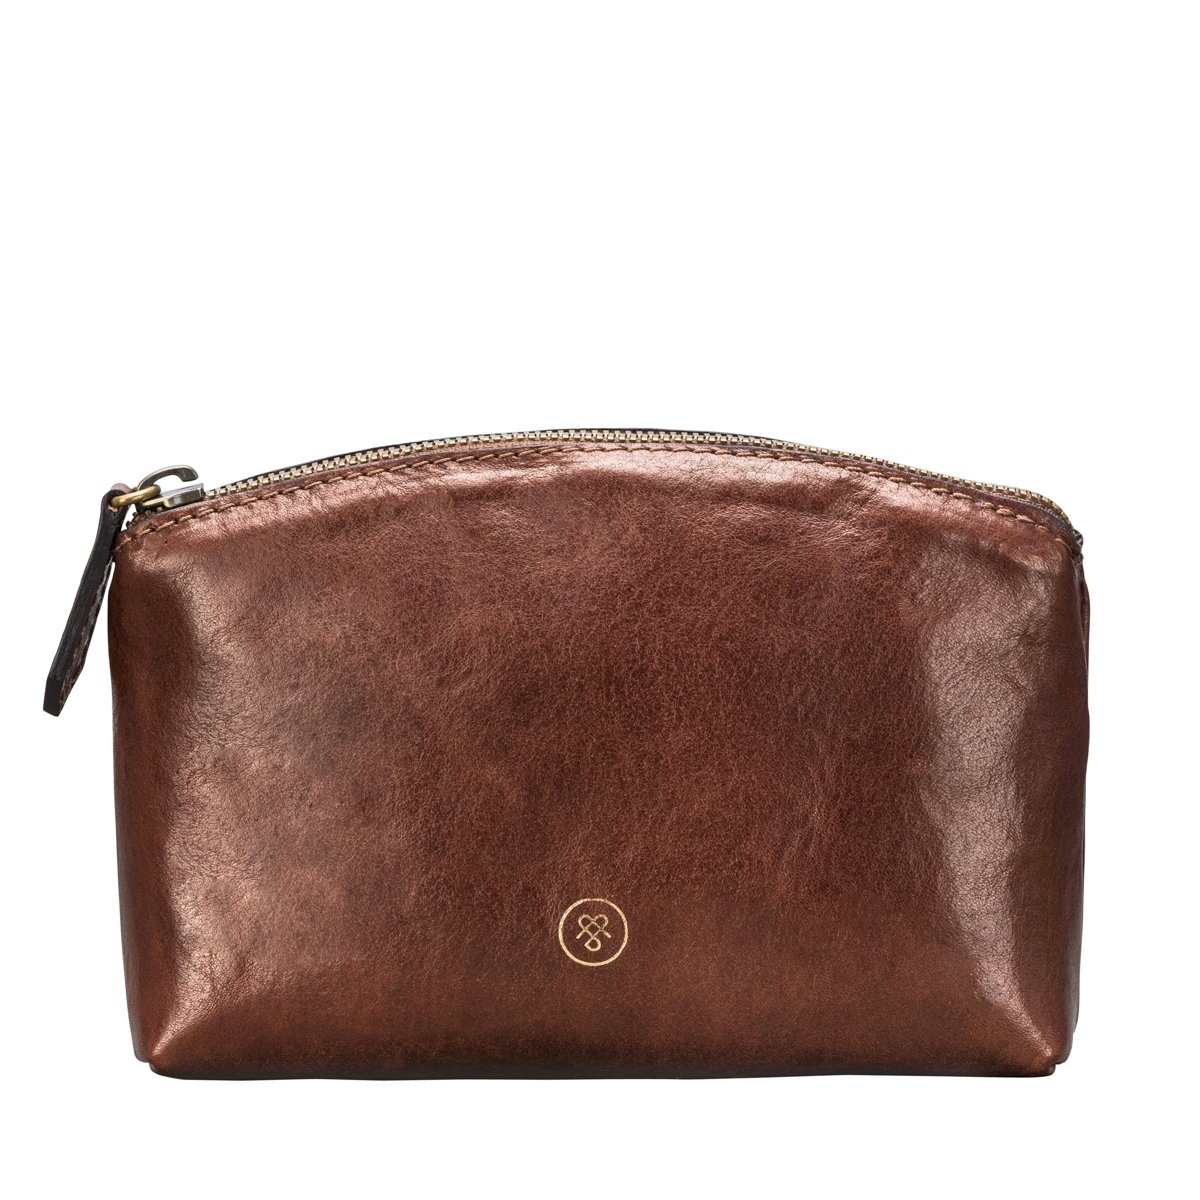 Ladies' Leather Makeup Bag | The Chia | 25-Year Warranty